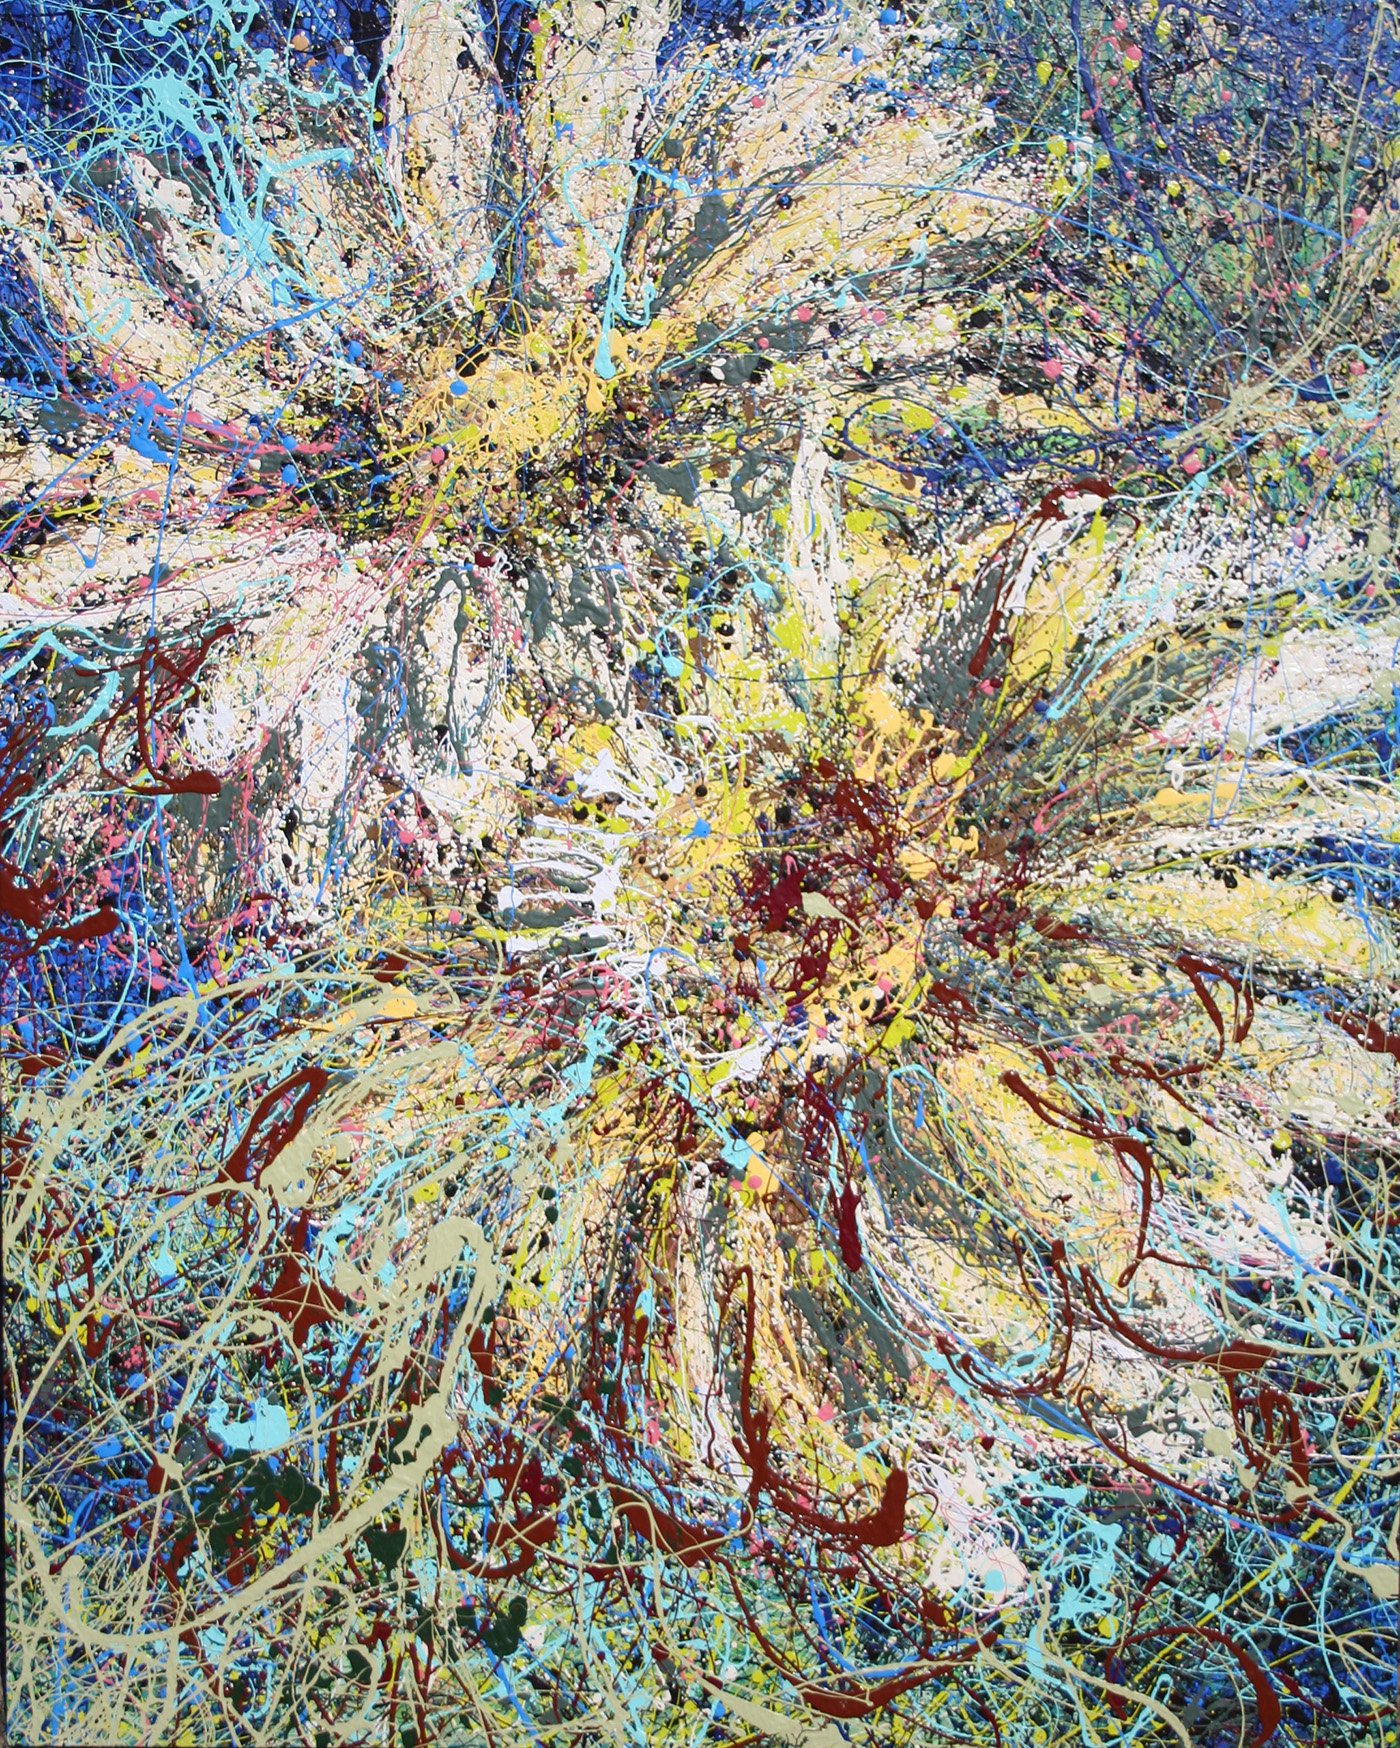 Floral Latex Enamel Painting on Gallery Wrapped Canvas by Fort Collins, Colorado Artist Lisa Cameron Russell